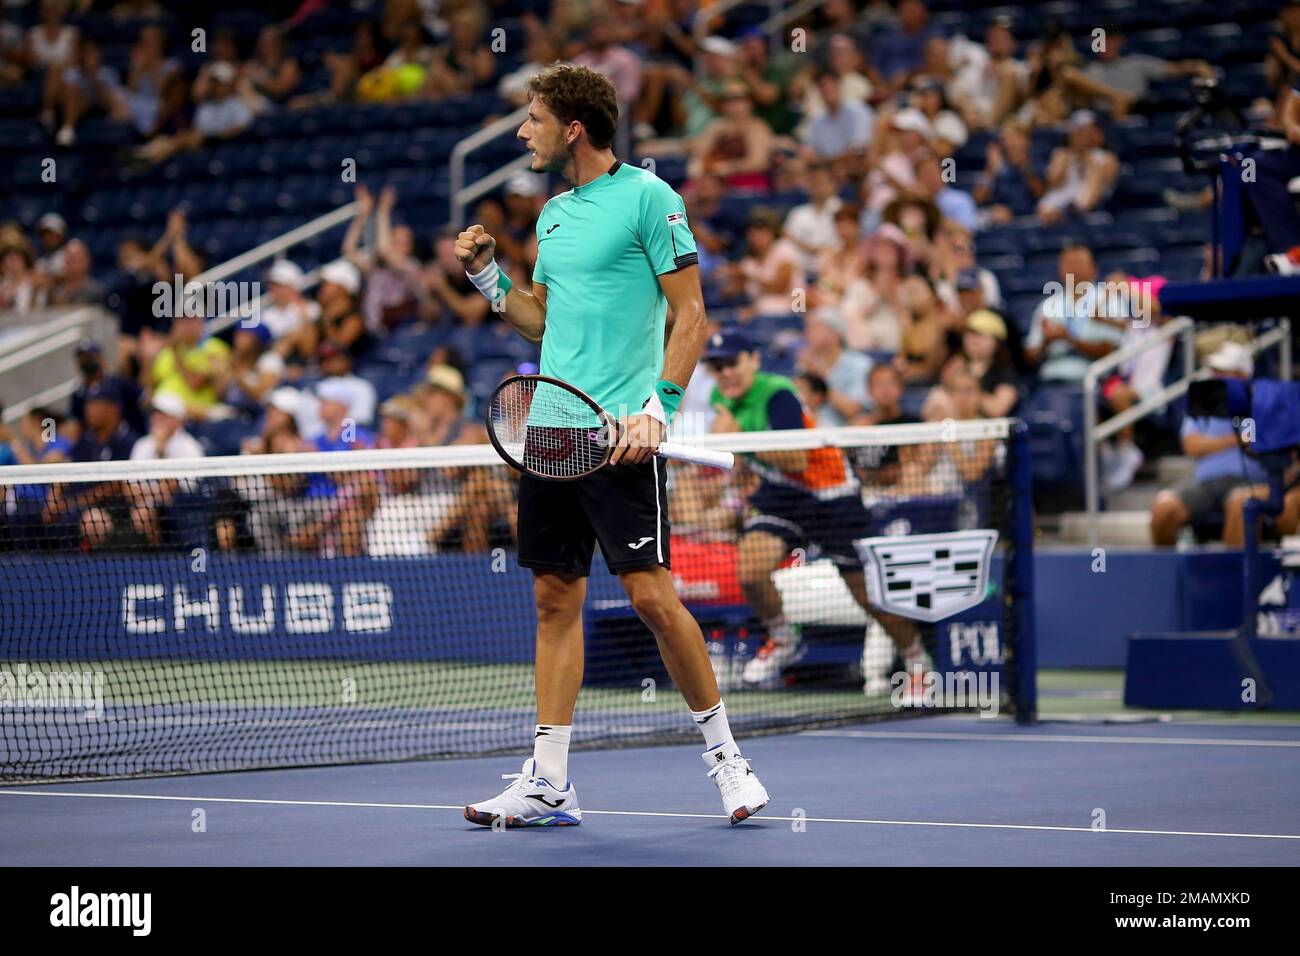 Pablo Carreno Busta, of Spain, celebrates winning a point agianast Karen Khachanov, of Russia, during the fourth round of the U.S. Open tennis championships, Sunday, Sept